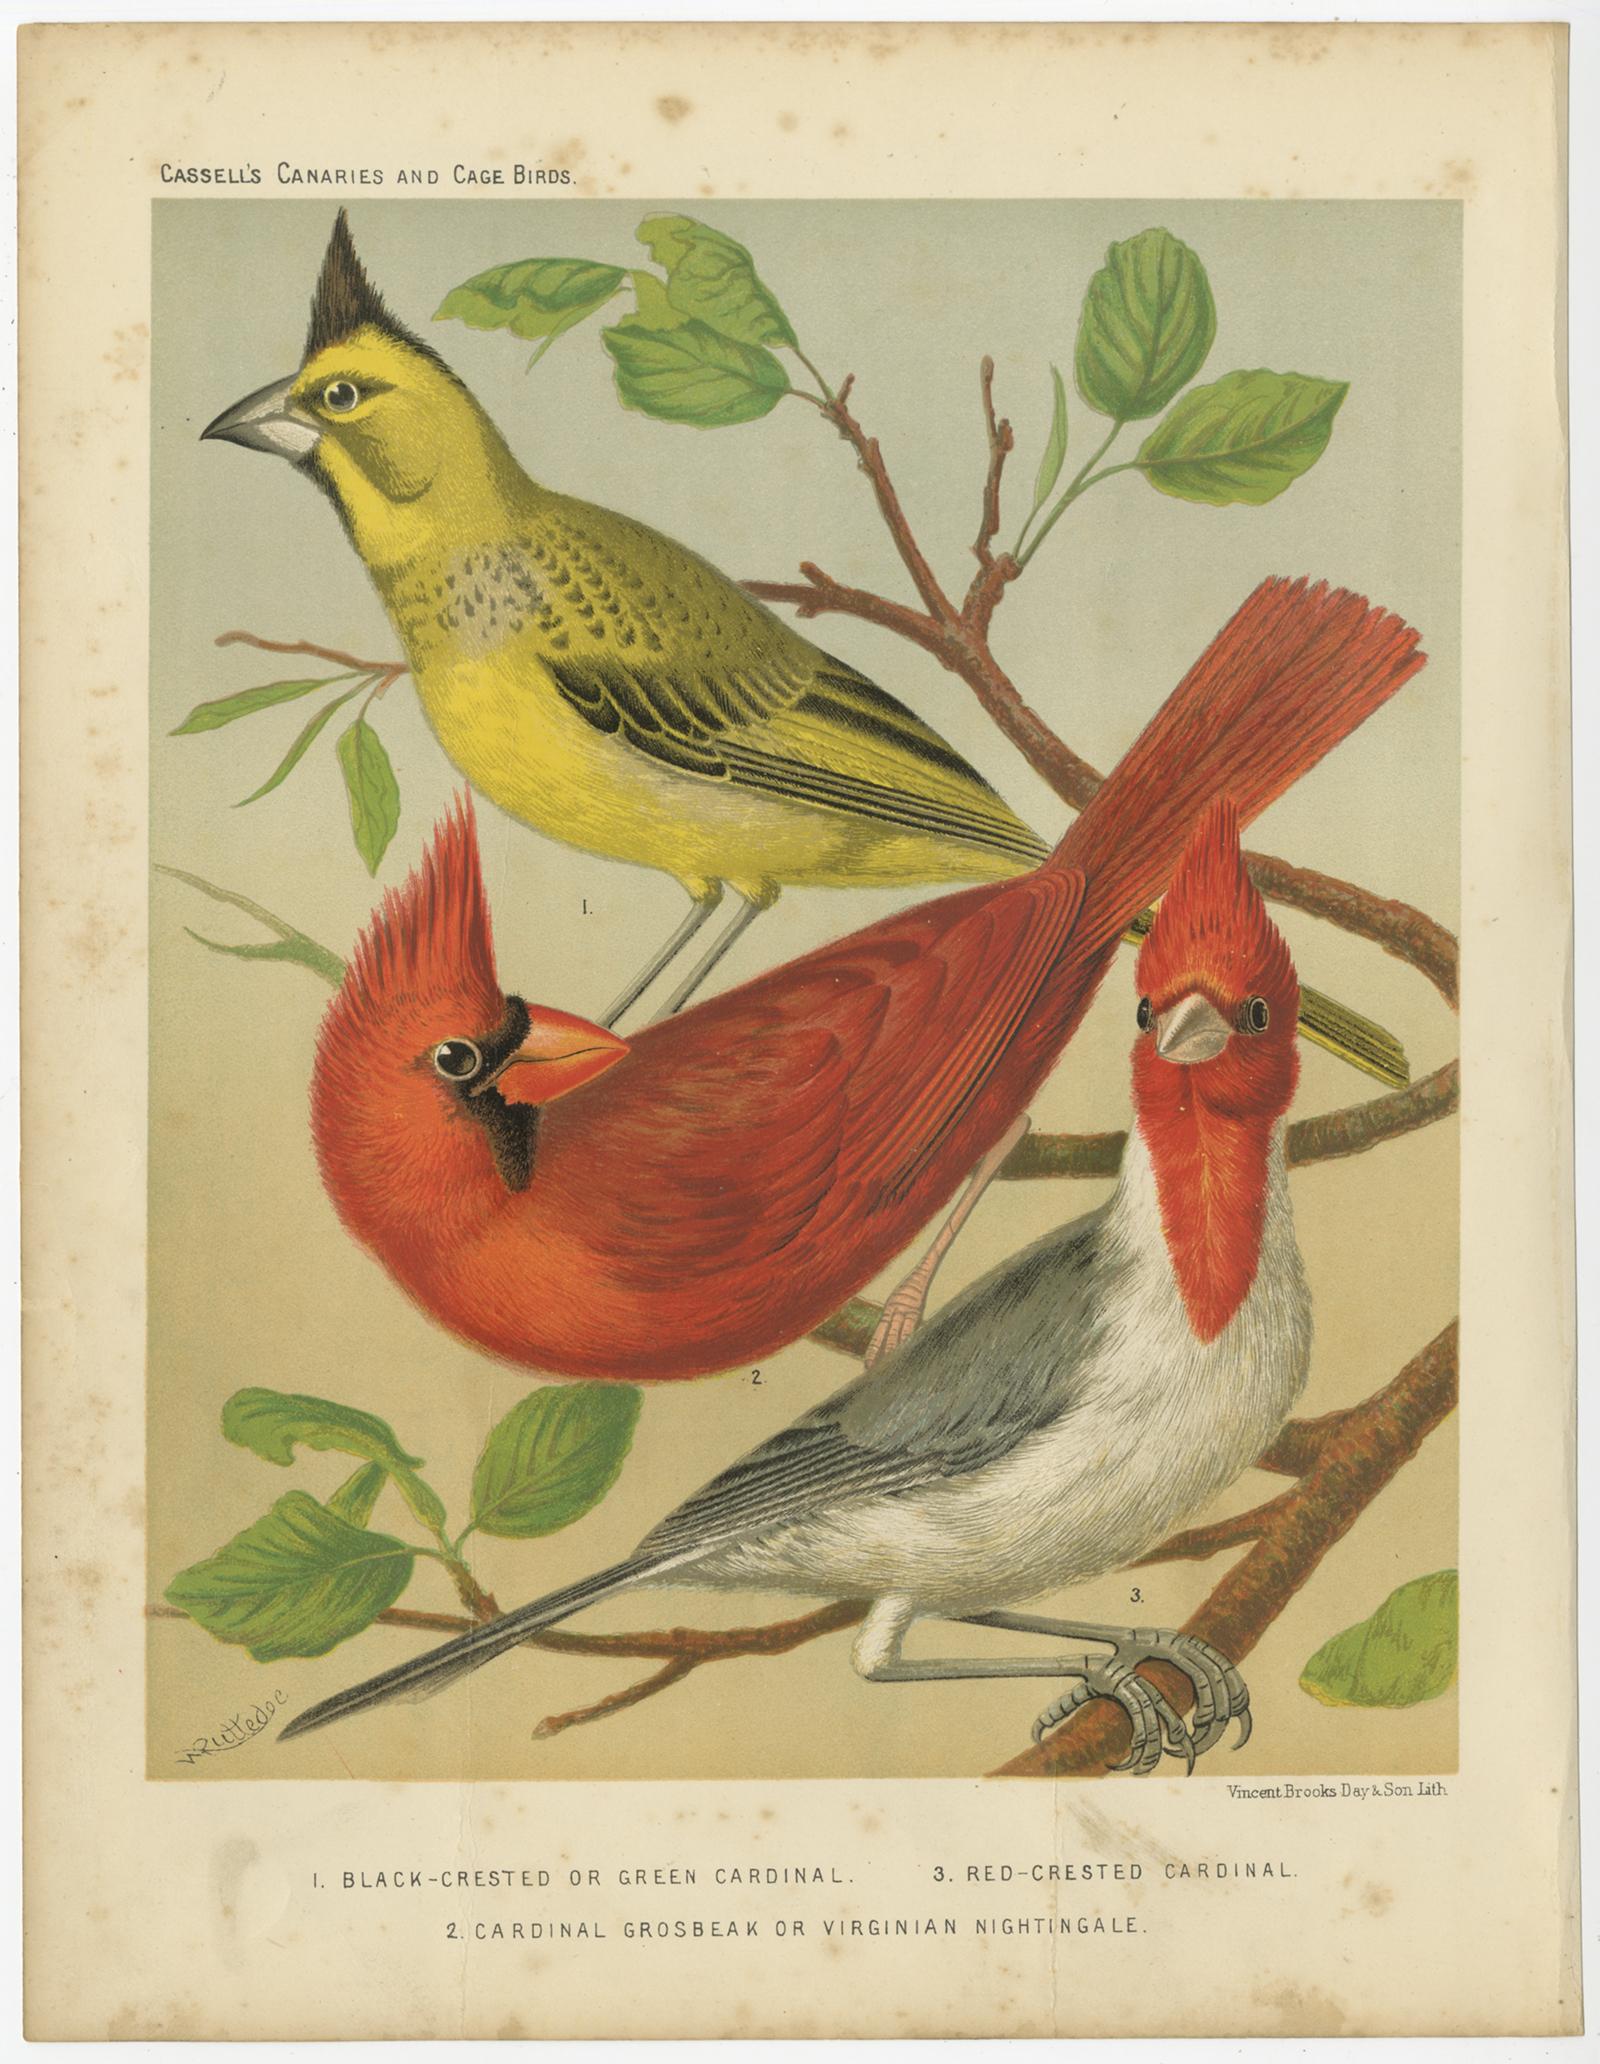 Antique bird print titled '1. Black-crested or green cardinal. 2. Red-crested cardinal. 3. Cardinal grosbeak or virginian nightinggale.' Old bird print depicting the black-crested or green cardinal, red-crested cardinal, cardinal grosbeak. This